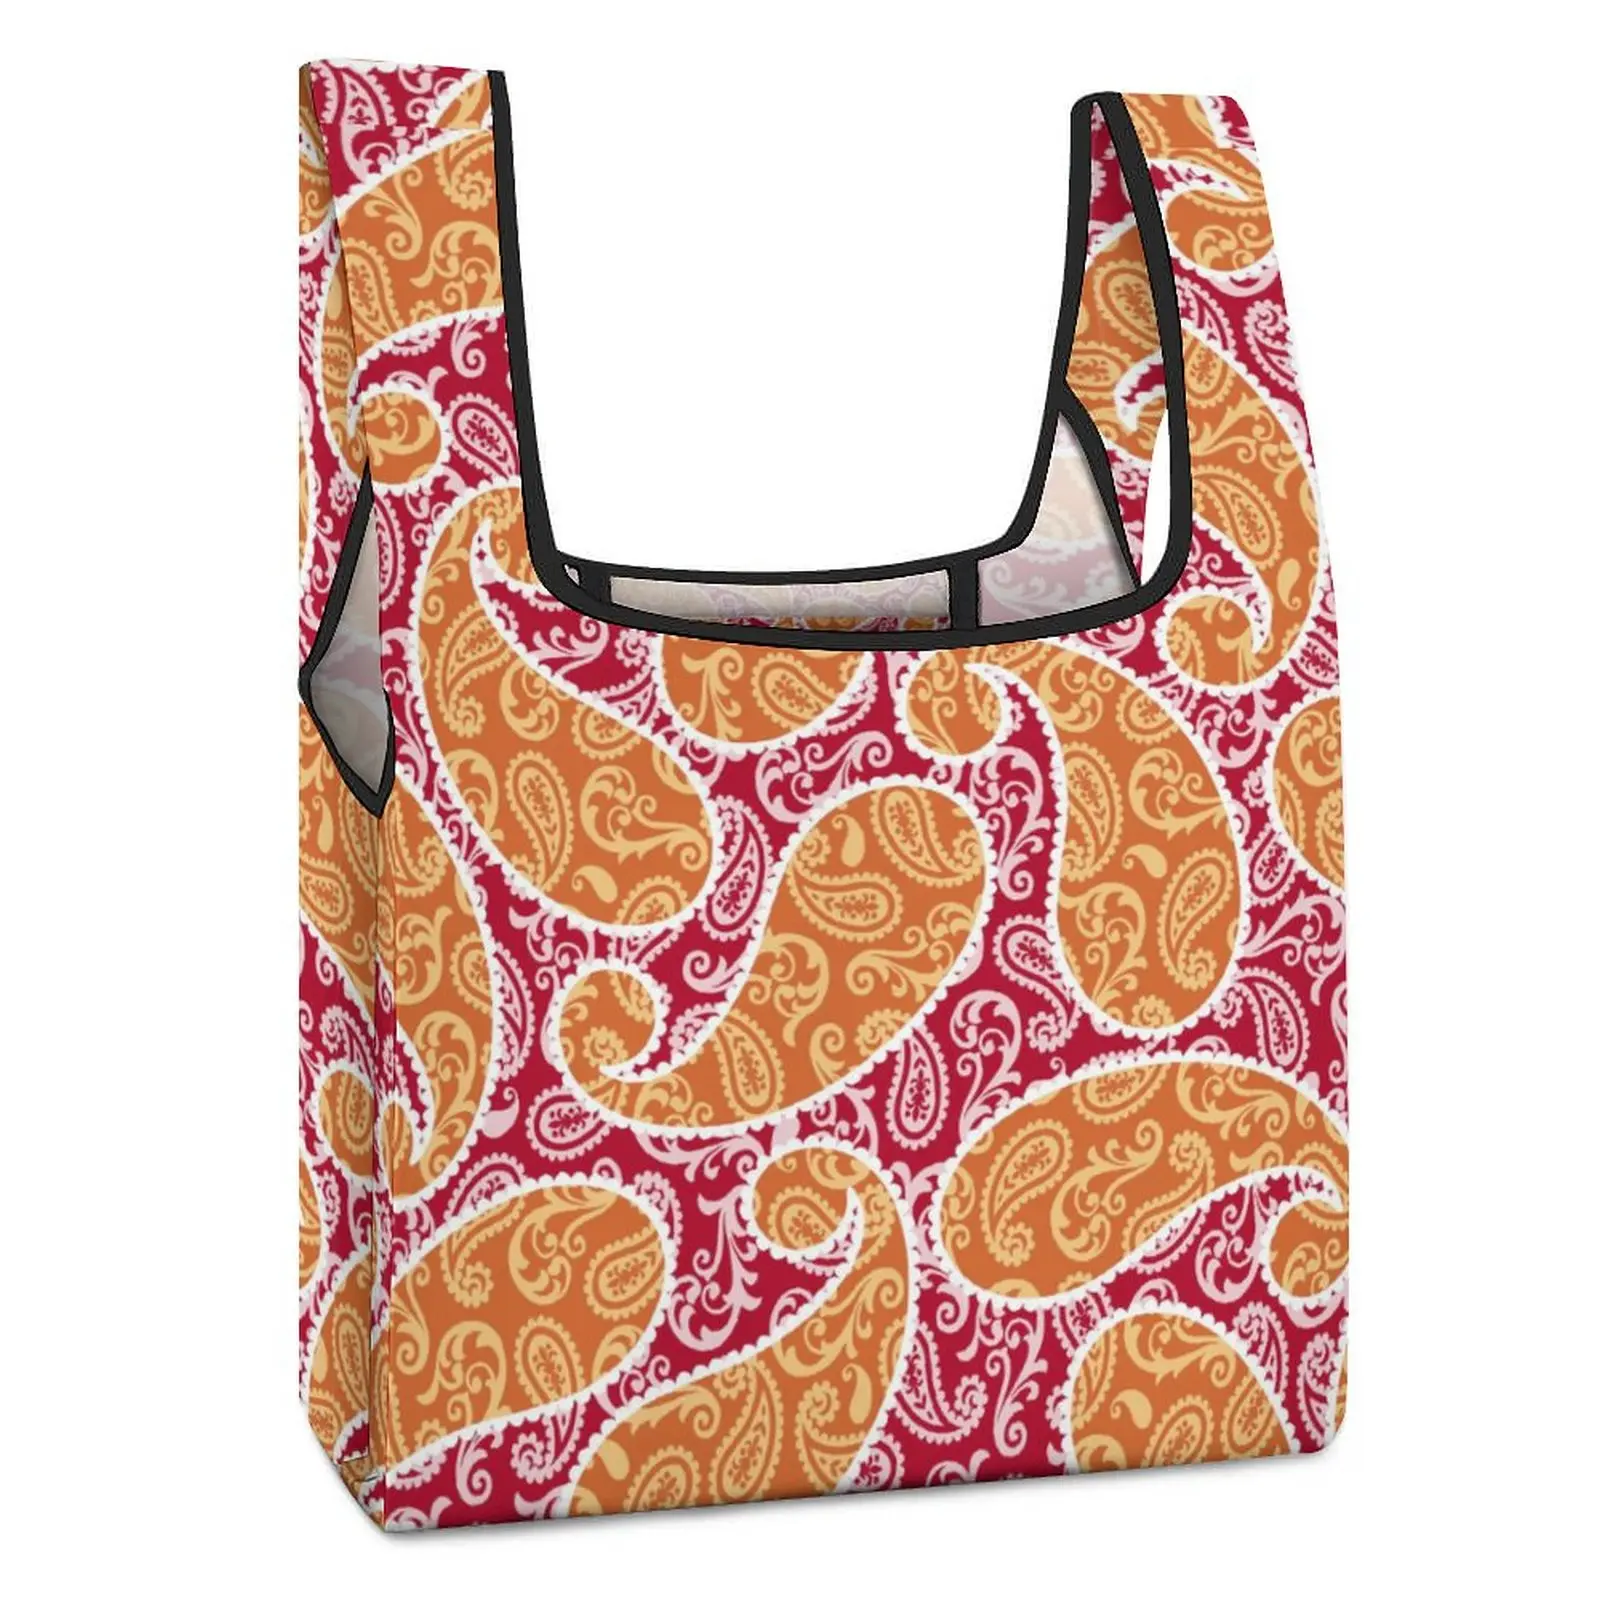 Red Unique Decor Shopping Bag Double Strap Handbag Casual Woman Grocery Bag Tote Bag Asthetic Customized Printed